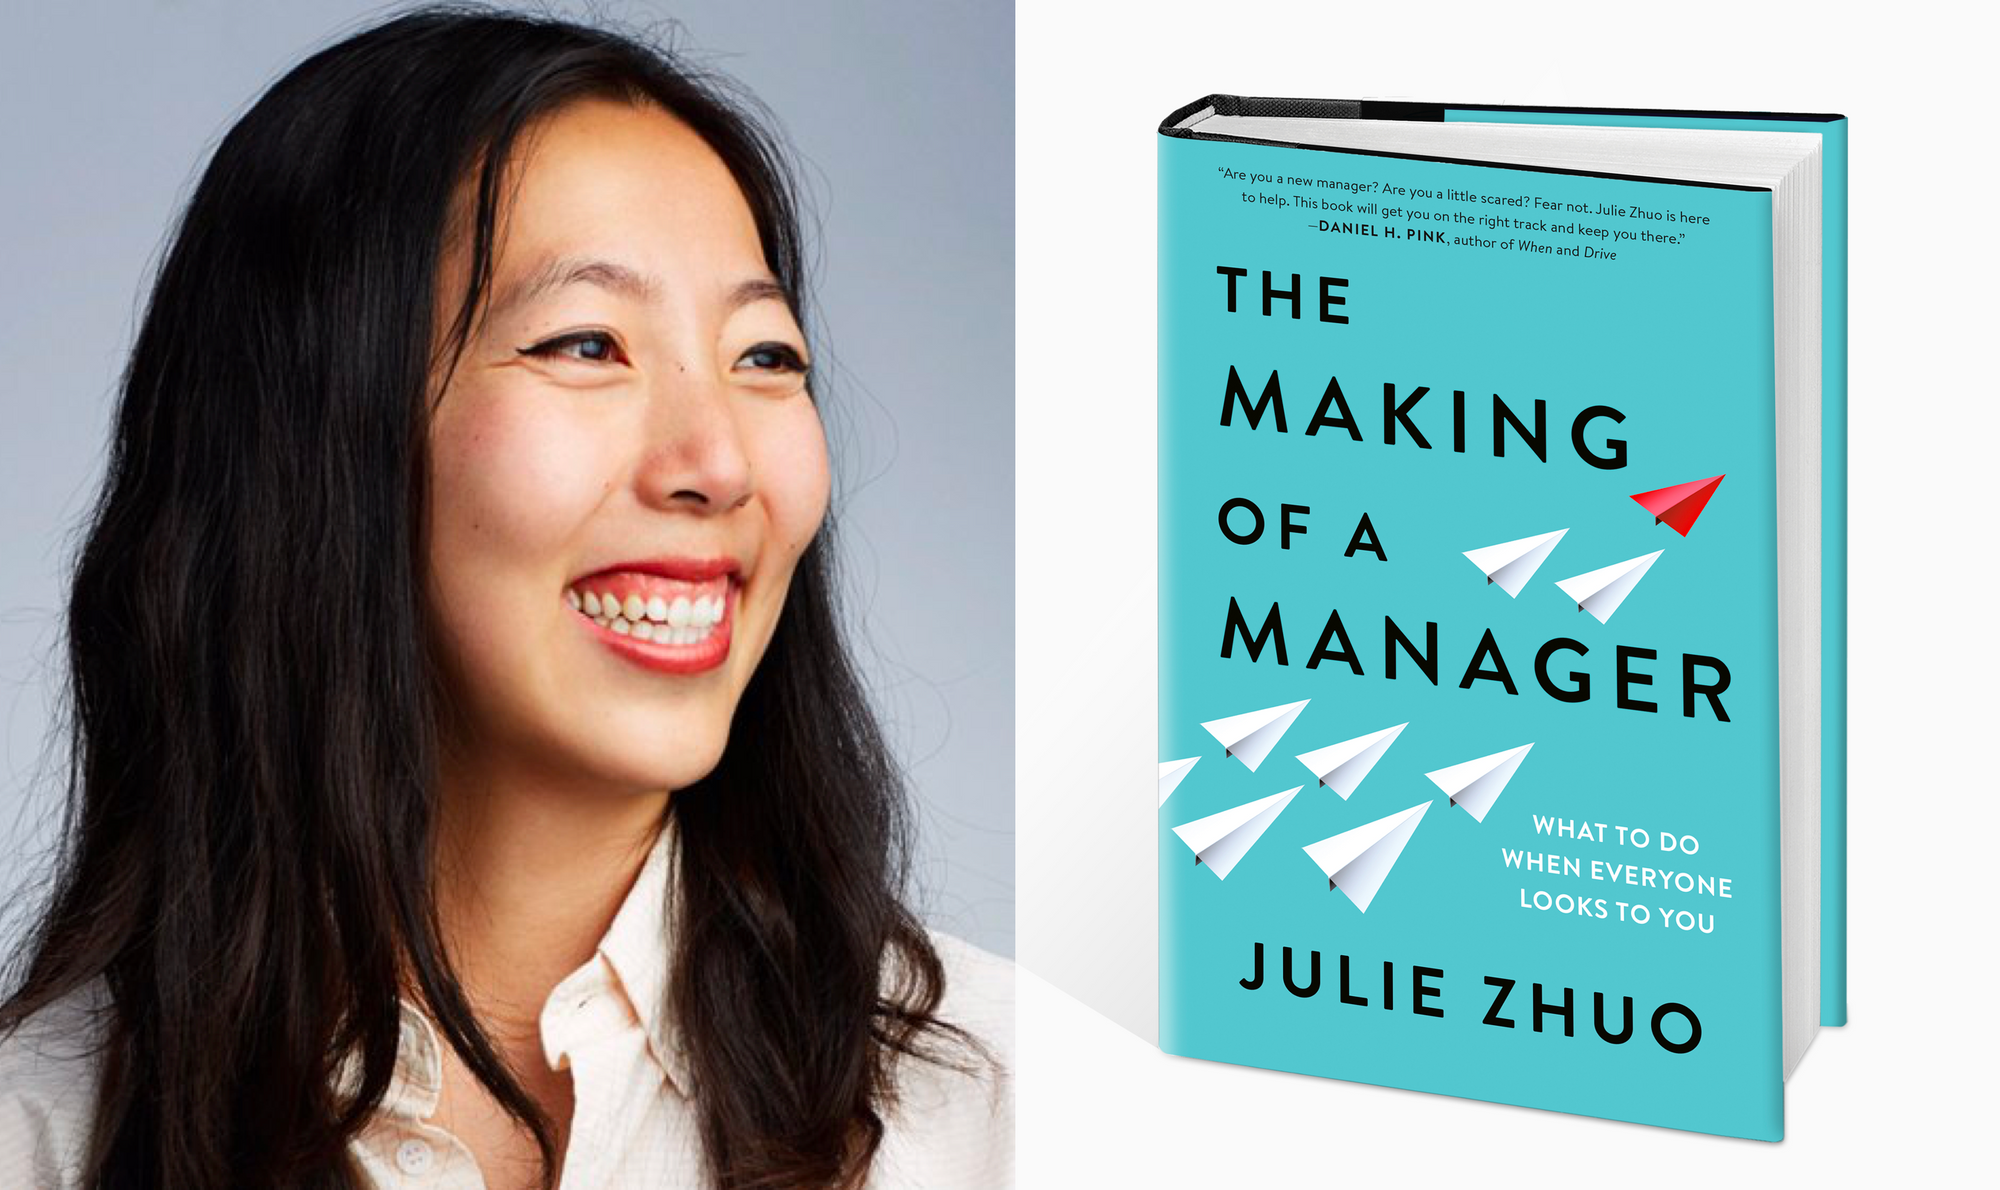 The Making of a Manager: What to Do When Everyone Looks to You – Julie Zhou